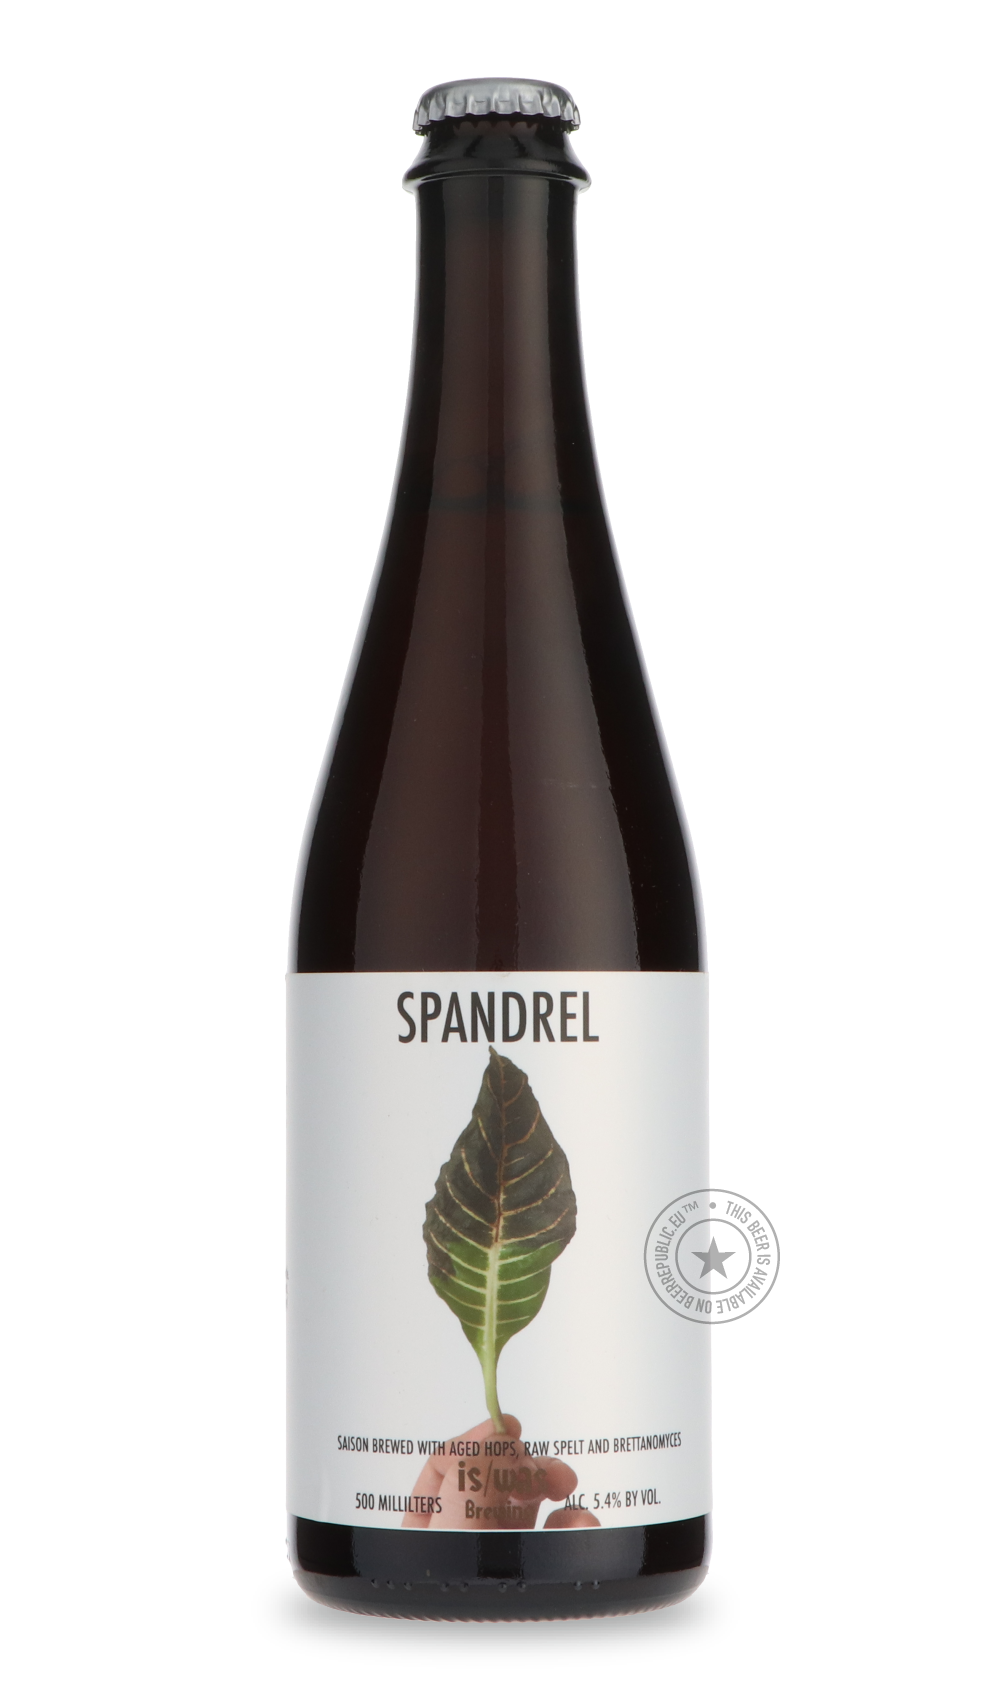 -is/was- Spandrel-Sour / Wild & Fruity- Only @ Beer Republic - The best online beer store for American & Canadian craft beer - Buy beer online from the USA and Canada - Bier online kopen - Amerikaans bier kopen - Craft beer store - Craft beer kopen - Amerikanisch bier kaufen - Bier online kaufen - Acheter biere online - IPA - Stout - Porter - New England IPA - Hazy IPA - Imperial Stout - Barrel Aged - Barrel Aged Imperial Stout - Brown - Dark beer - Blond - Blonde - Pilsner - Lager - Wheat - Weizen - Amber 